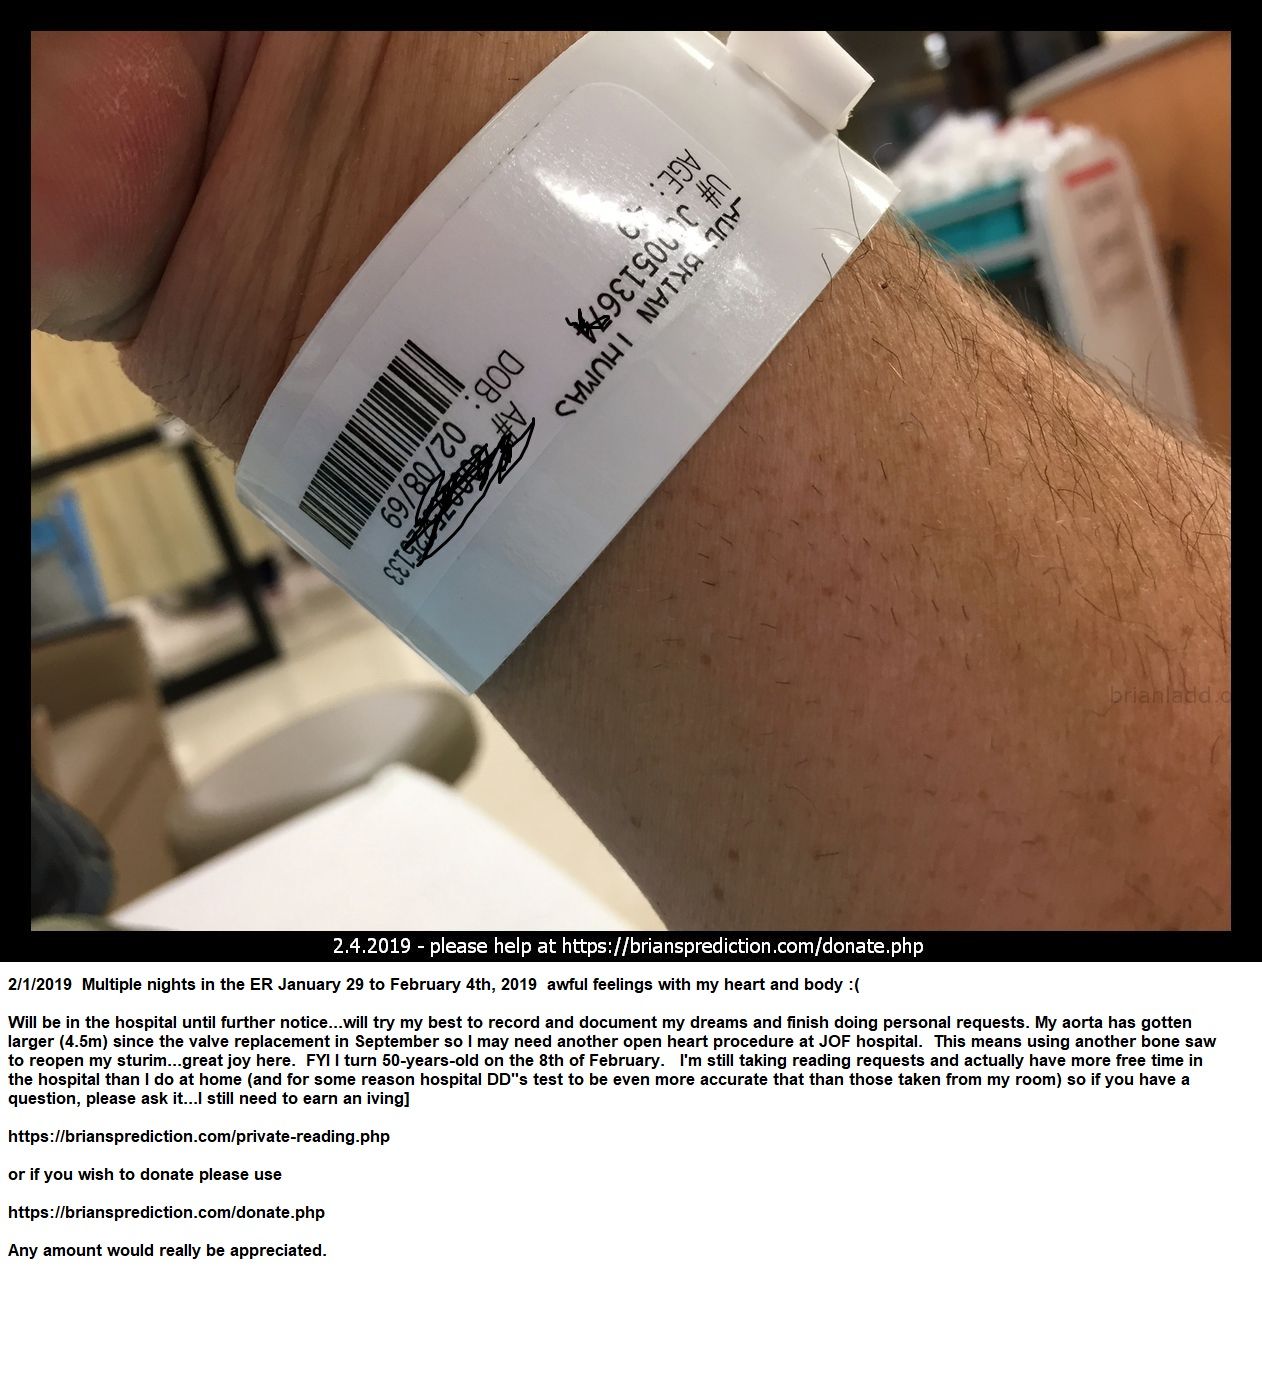 3 2019 Hospital Again - January 25th 2019: Â 2/1/2019 Multiple Nights In The Er January 29 To February 4th, 2019 Awful...
January 25th 2019: Â 2/1/2019 Multiple Nights In The Er January 29 To February 4th, 2019 Awful Feelings With My Heart And Body :(  Will Be In The Hospital Until Further Notice  Will Try My Best To Record And Document My Dreams And Finish Doing Personal Requests. My Aorta Has Gotten Larger (4.5m) Since The Valve Replacement In September So I May Need Another Open Heart Procedure At Jfk Hospital. This Means Using Another Bone Saw To Reopen My Sternum  Great Joy Here. Fyi I Turn 50-Years-Old On The 8th Of February. I'M Still Taking Reading Requests And Actually Have More Free Time In The Hospital Than I Do At Home (and For Some Reason Hospital Dds Test To Be Even More Accurate That Than Those Taken From My Room) So If You Have A Question, Please Ask It  I Still Need To Earn An Living.   https://briansprediction.com/Private-Reading.Php  Or If You Wish To Donate Please Use   https://briansprediction.com/Donate.Php  Any Amount Would Really Be Appreciated.
